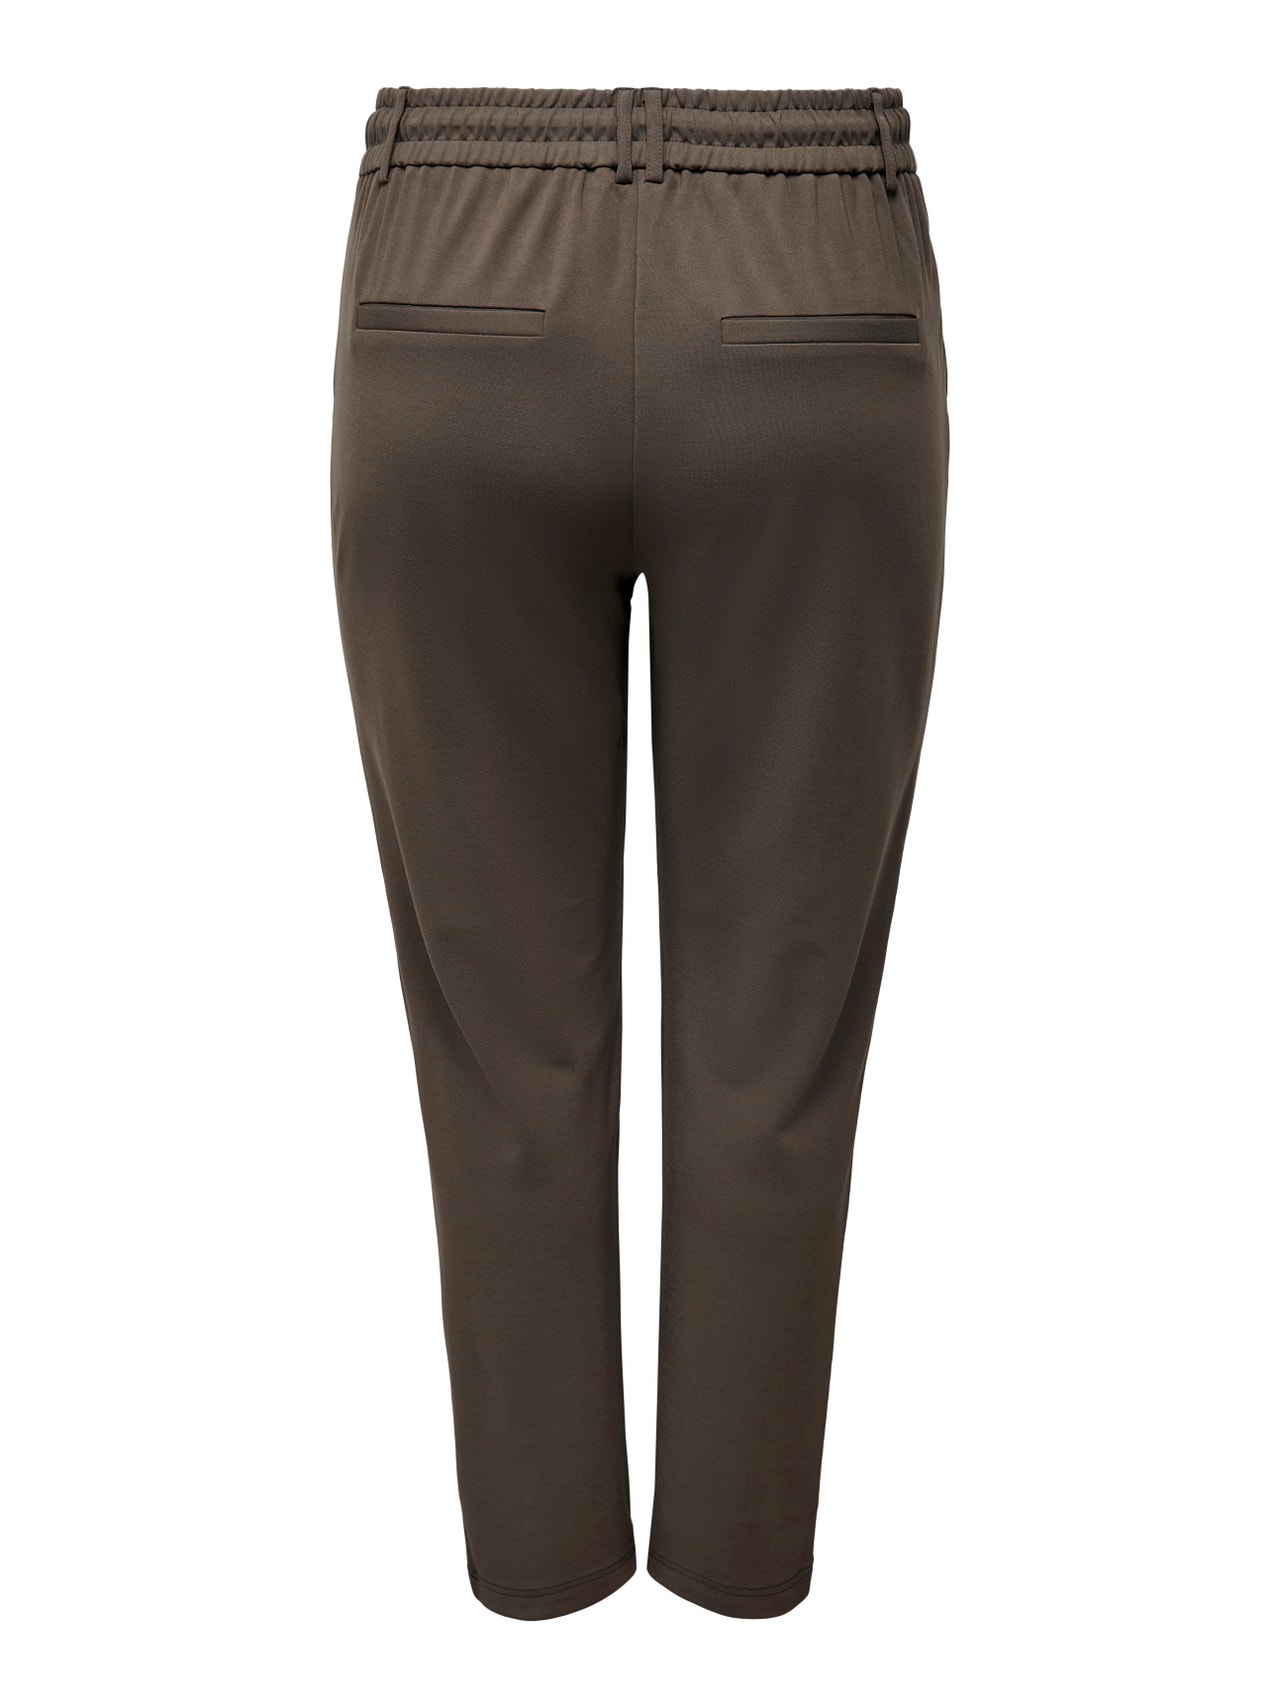 ONLY Curvy draw string pants -Chocolate Martini - 15287532